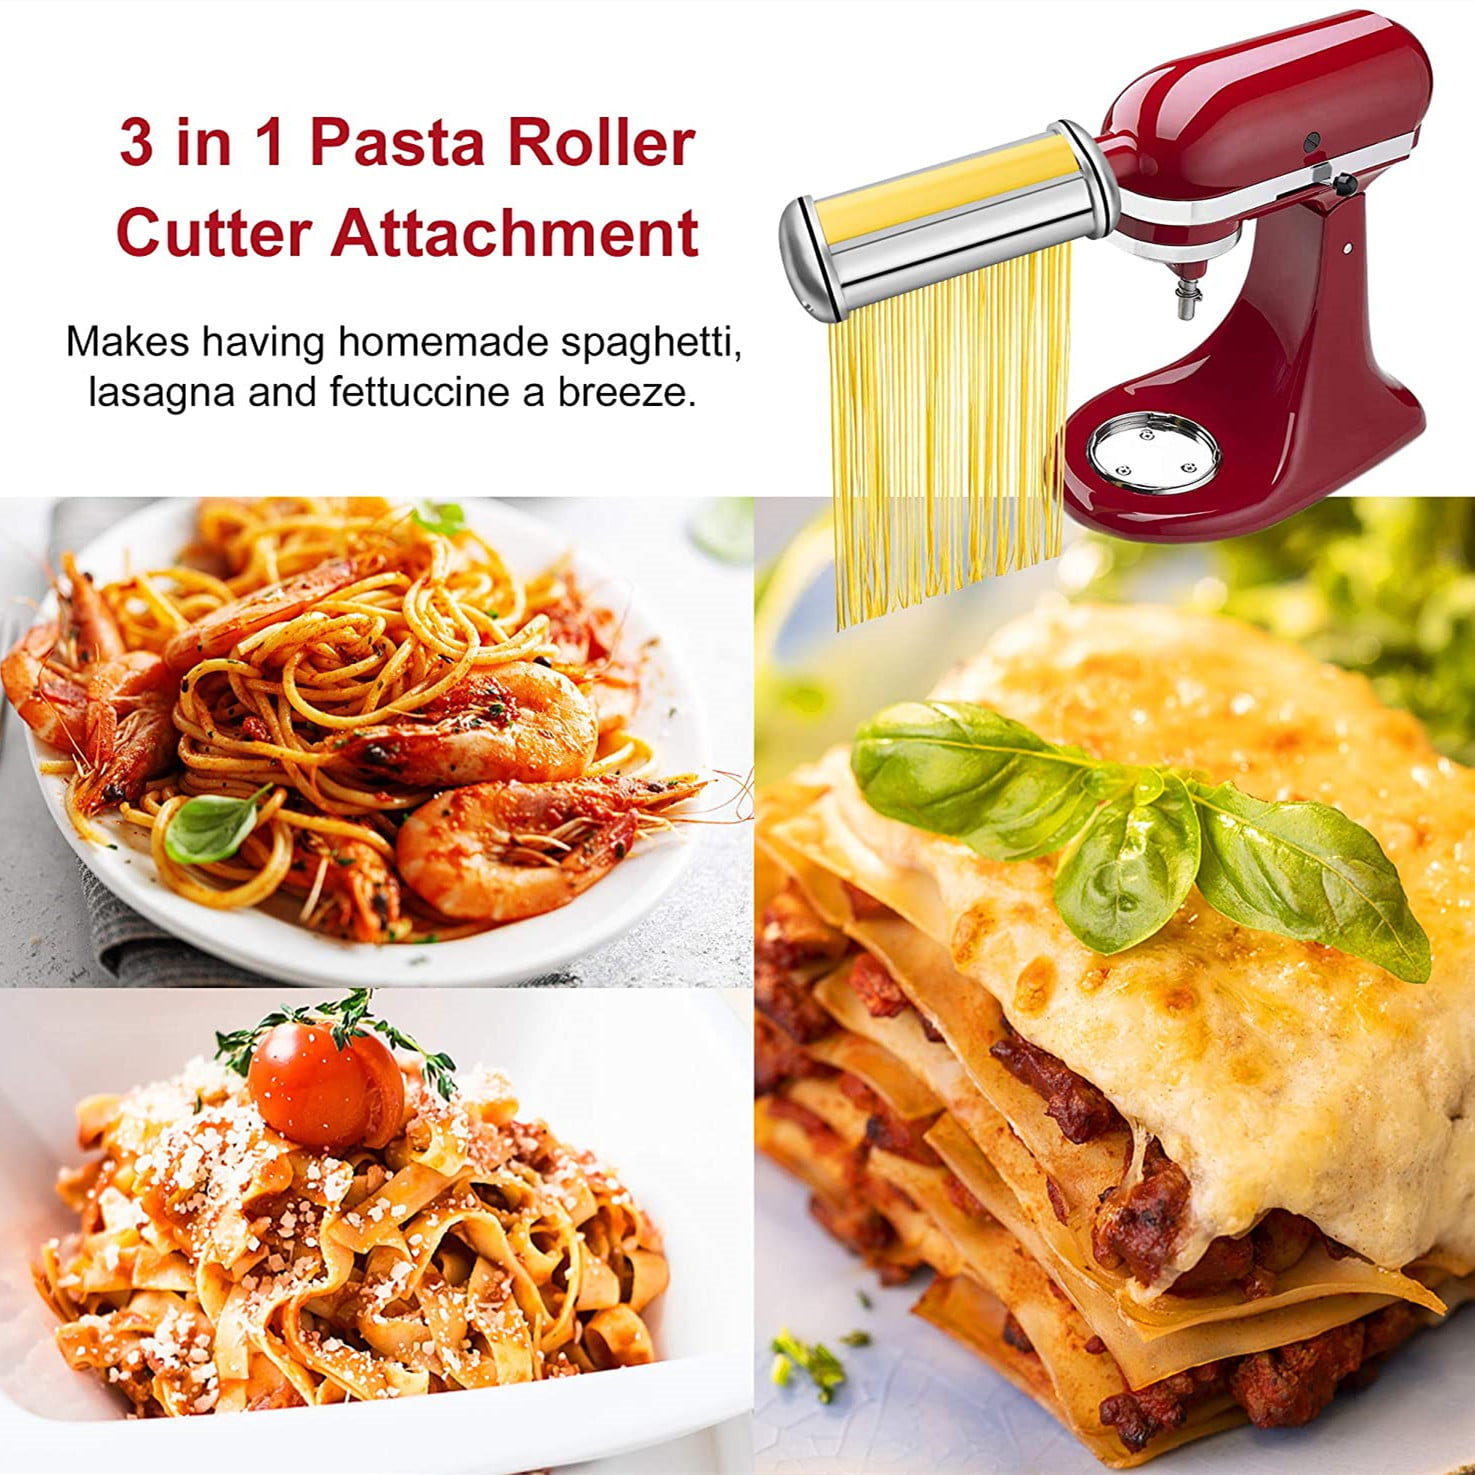 Many Uses with KitchenAid – Blender, Pasta Maker, and Convection